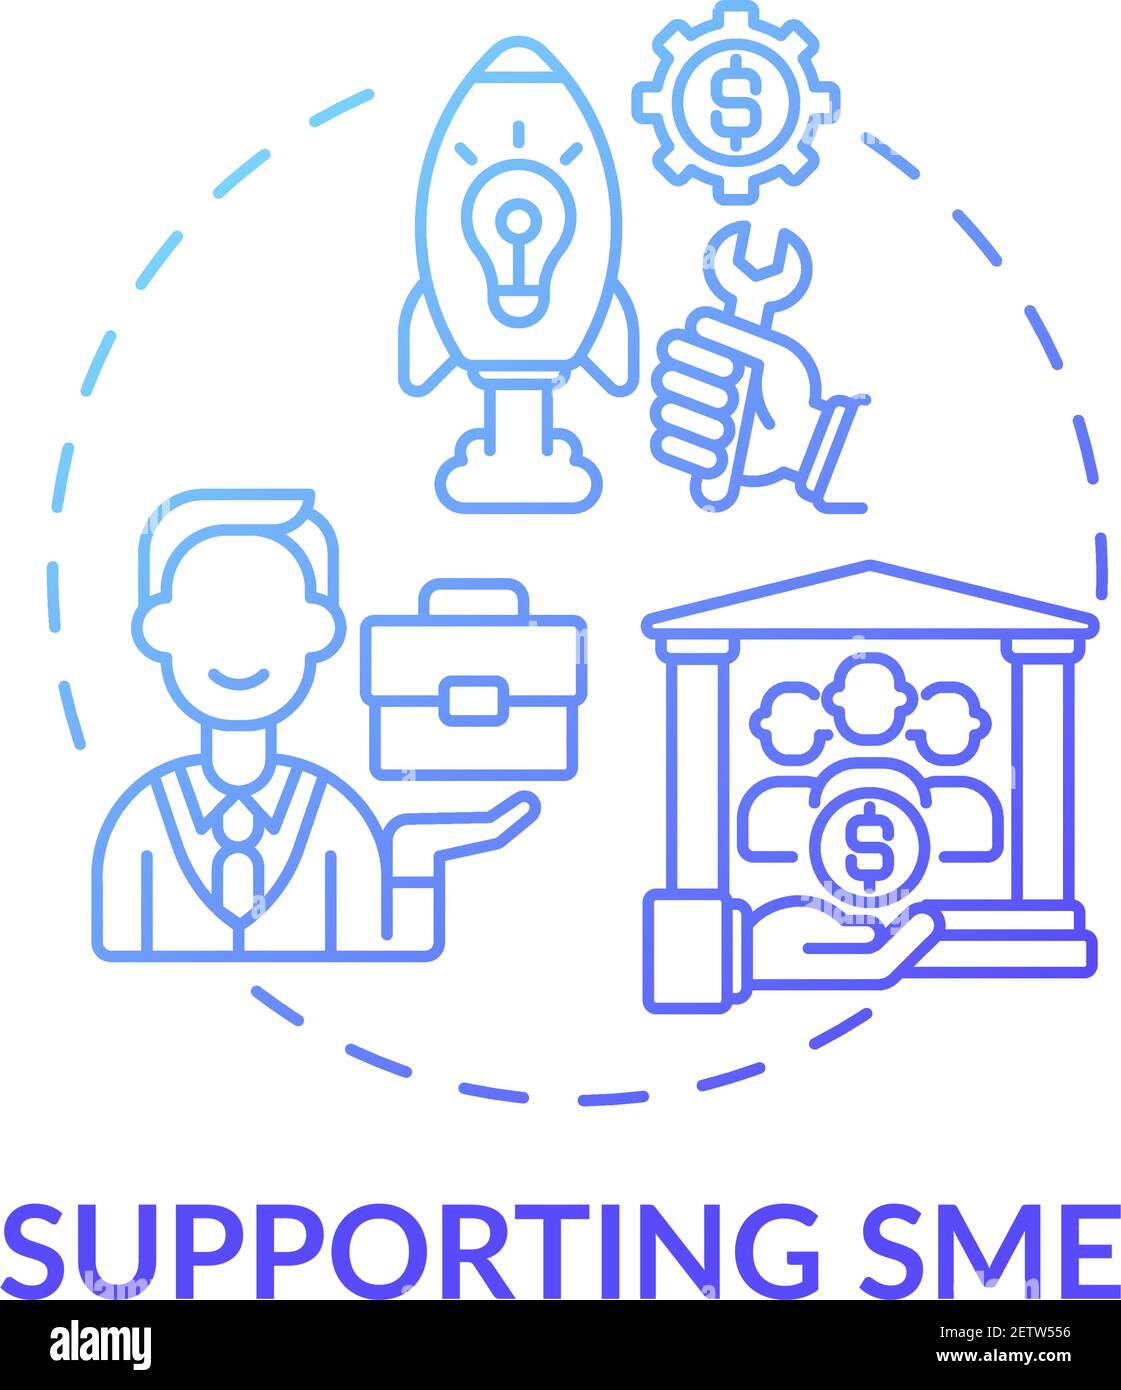 Supporting SME concept icon Stock Vector